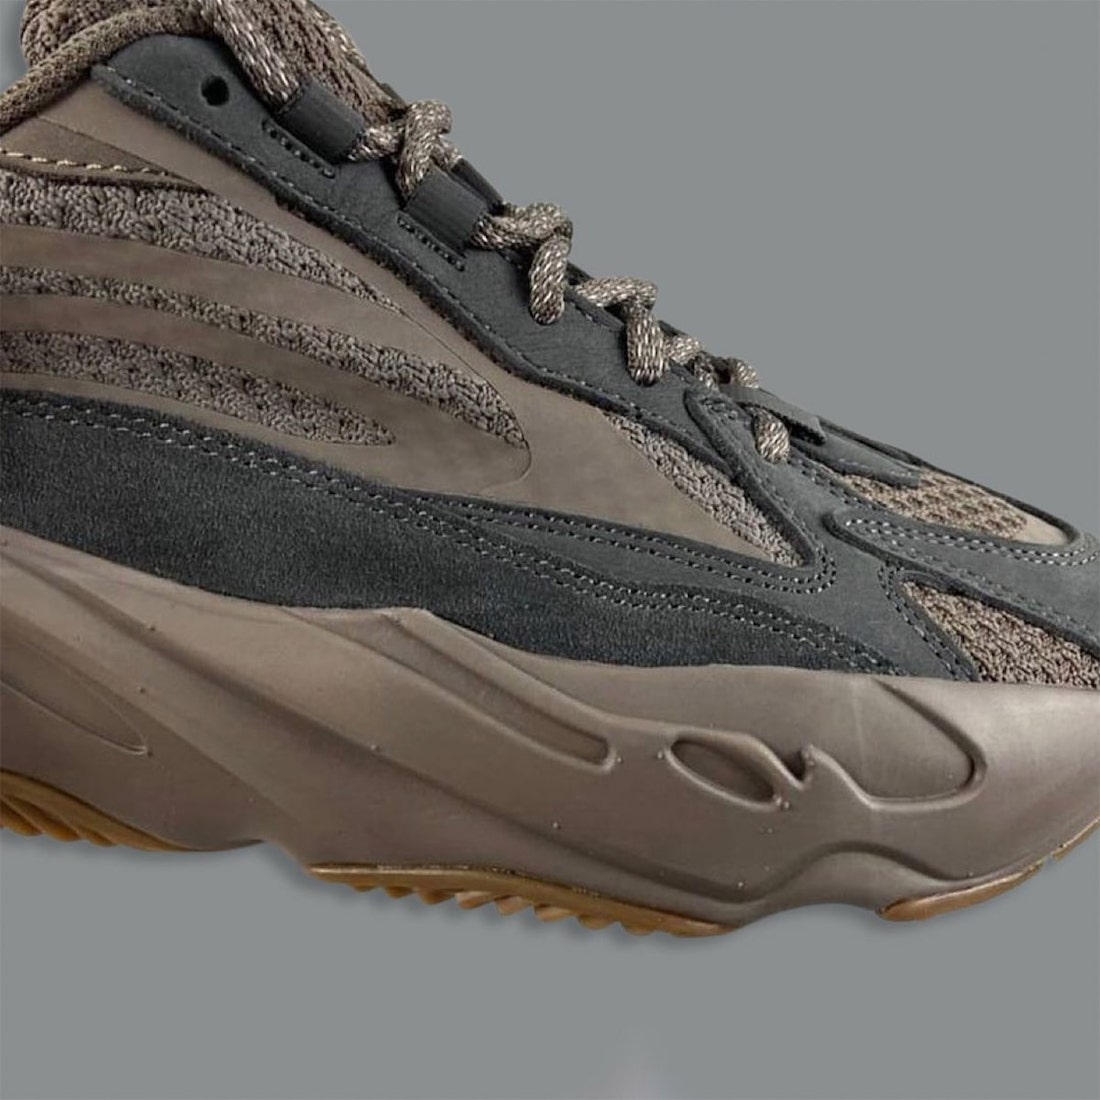 adidas Yeezy Boost 700 V2 Mauve Release Info